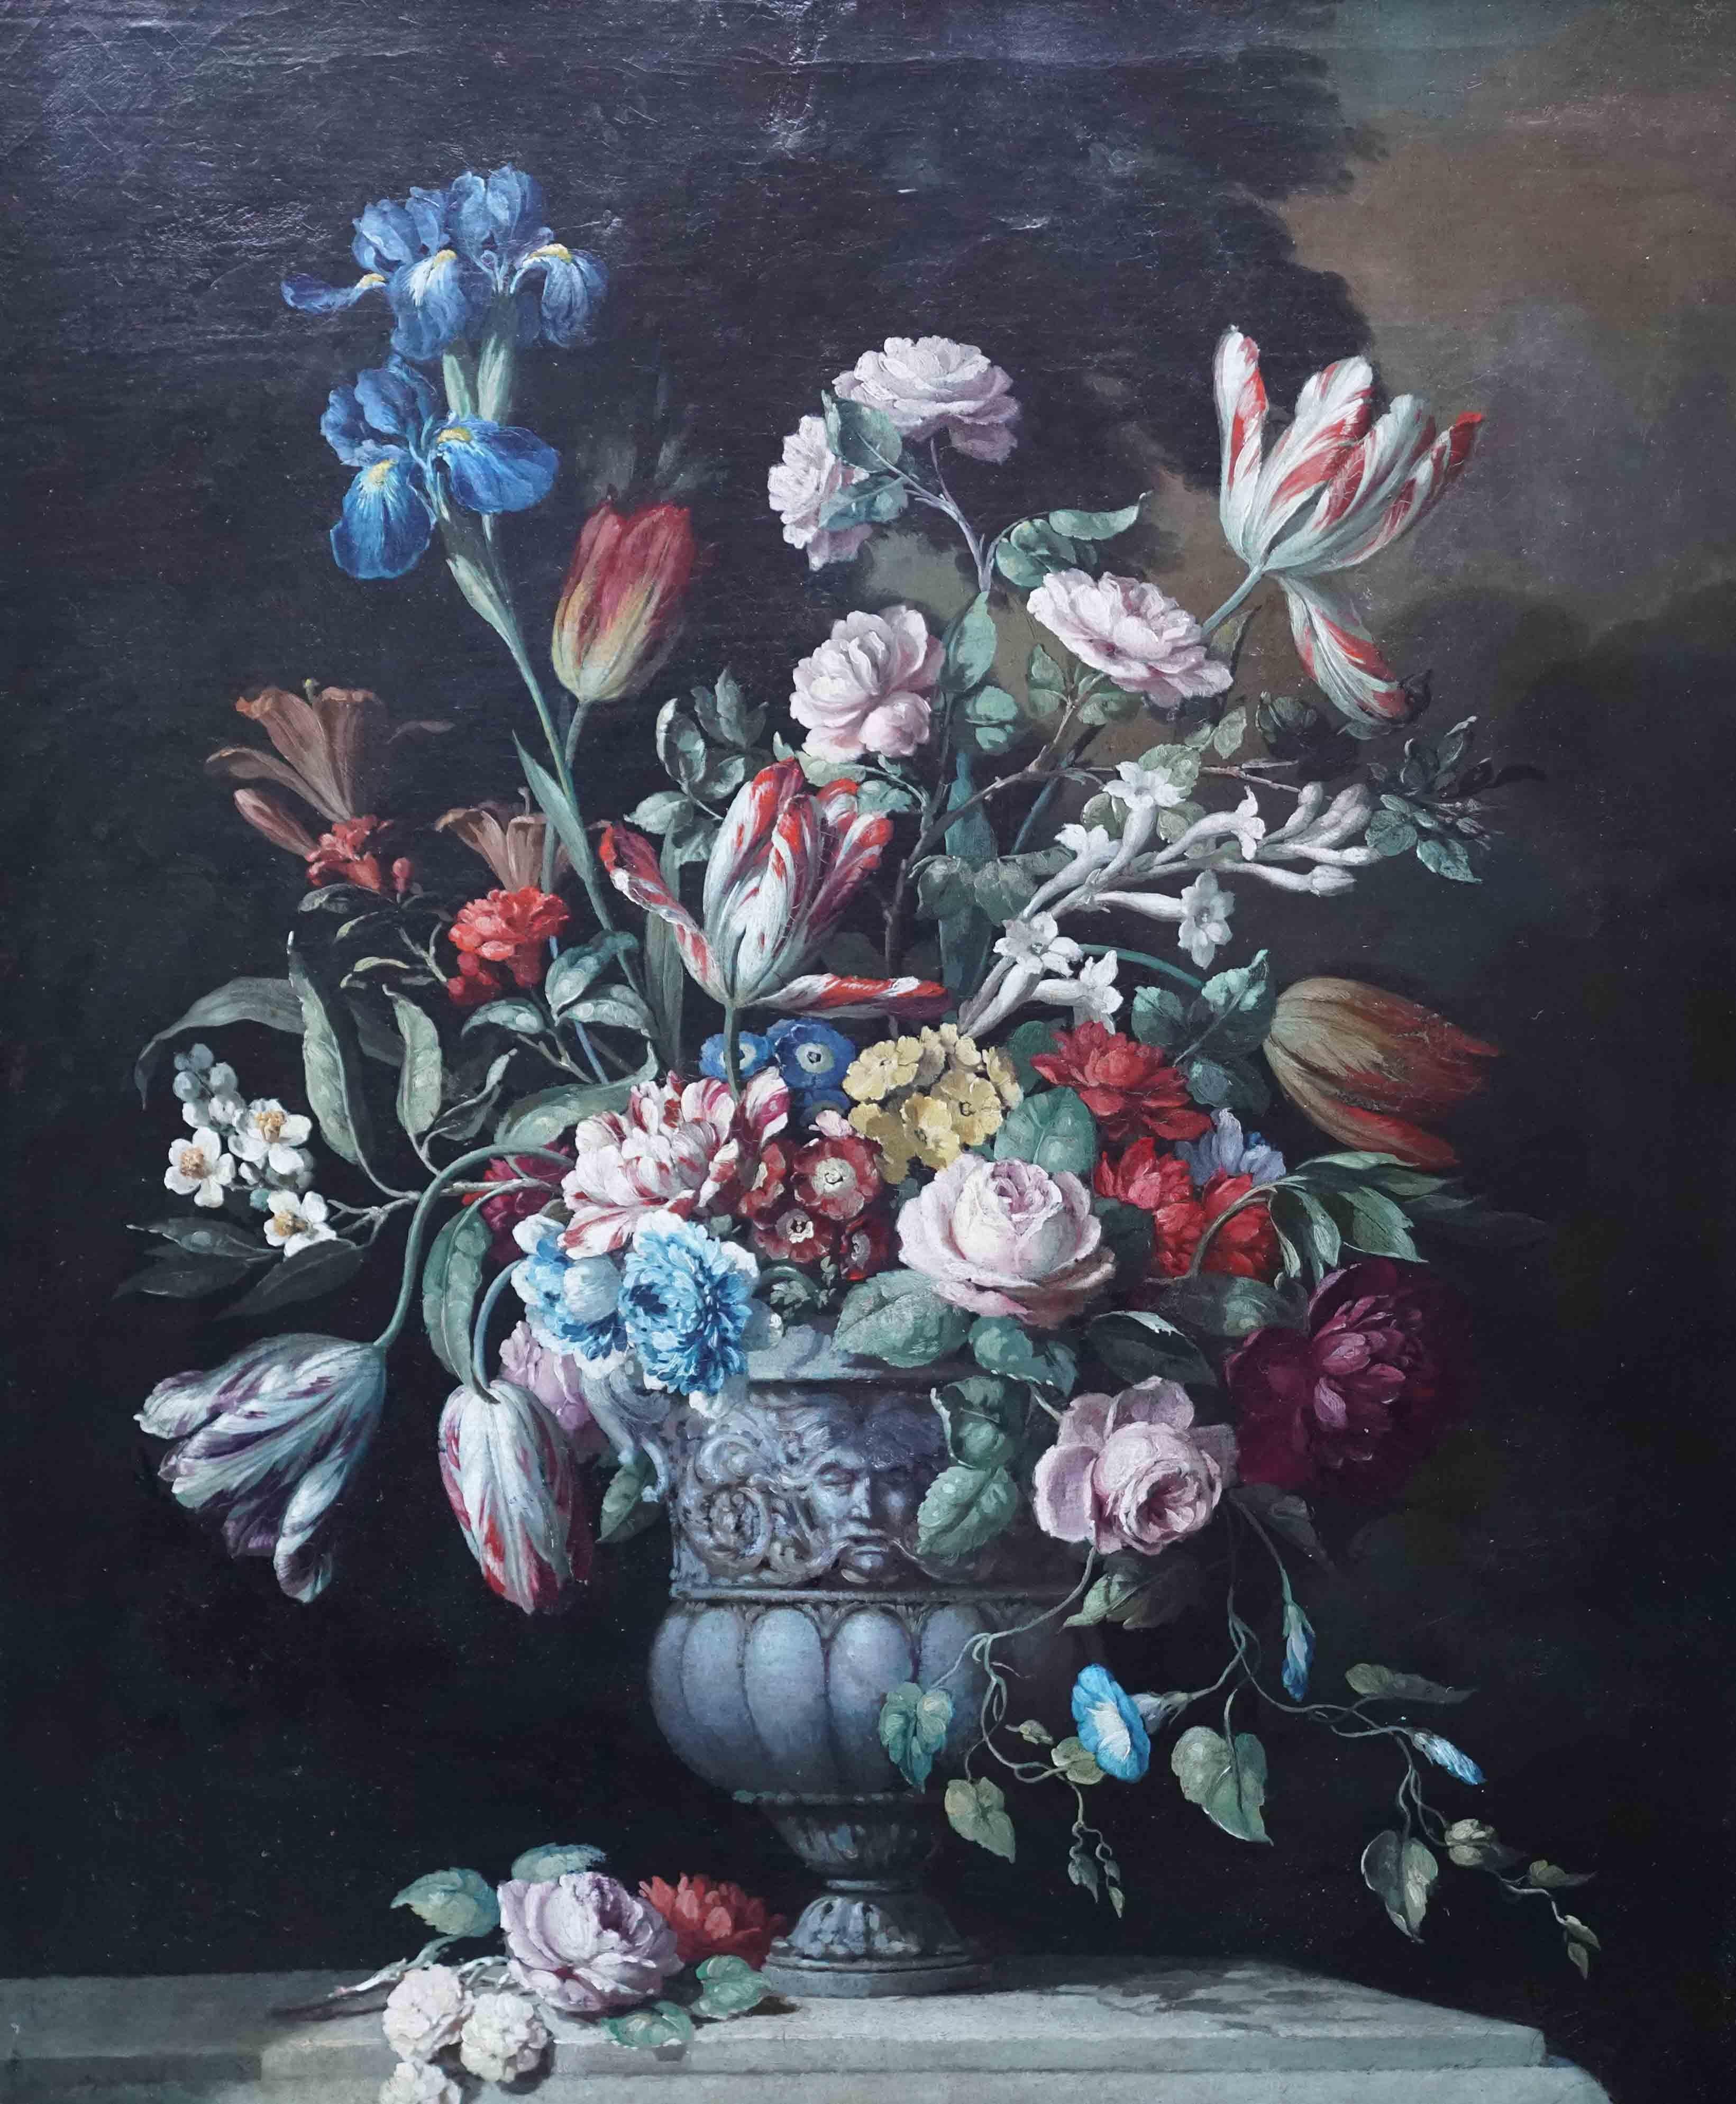 Still Life of Flowers in Ornamental Urn on Ledge - Dutch Old Master oil painting - Painting by Gerard van Spaendonck